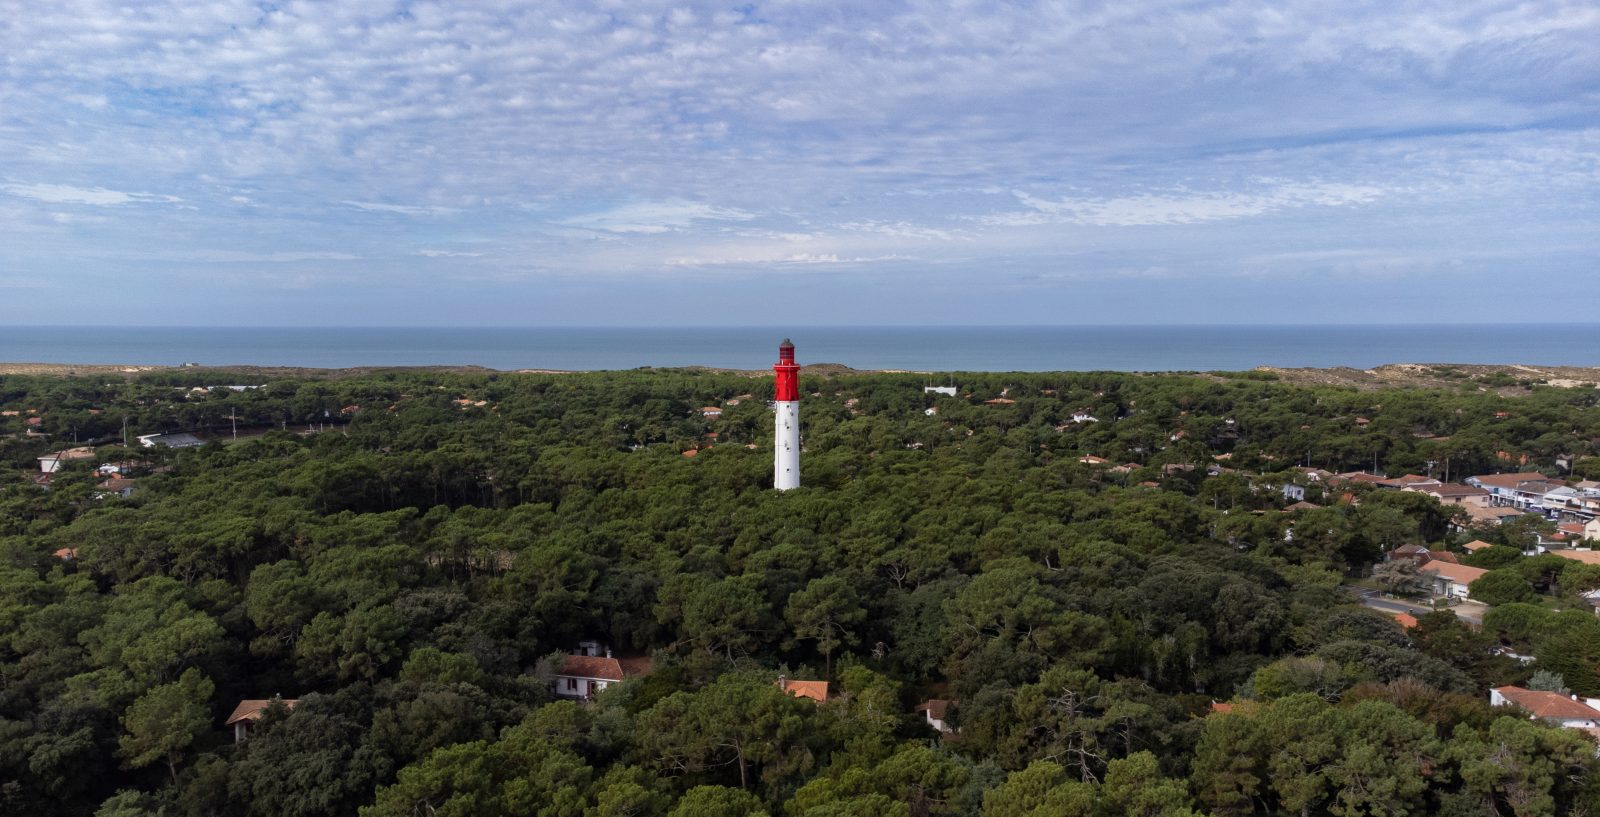 Iconic by bike: the Cap-Ferret lighthouse